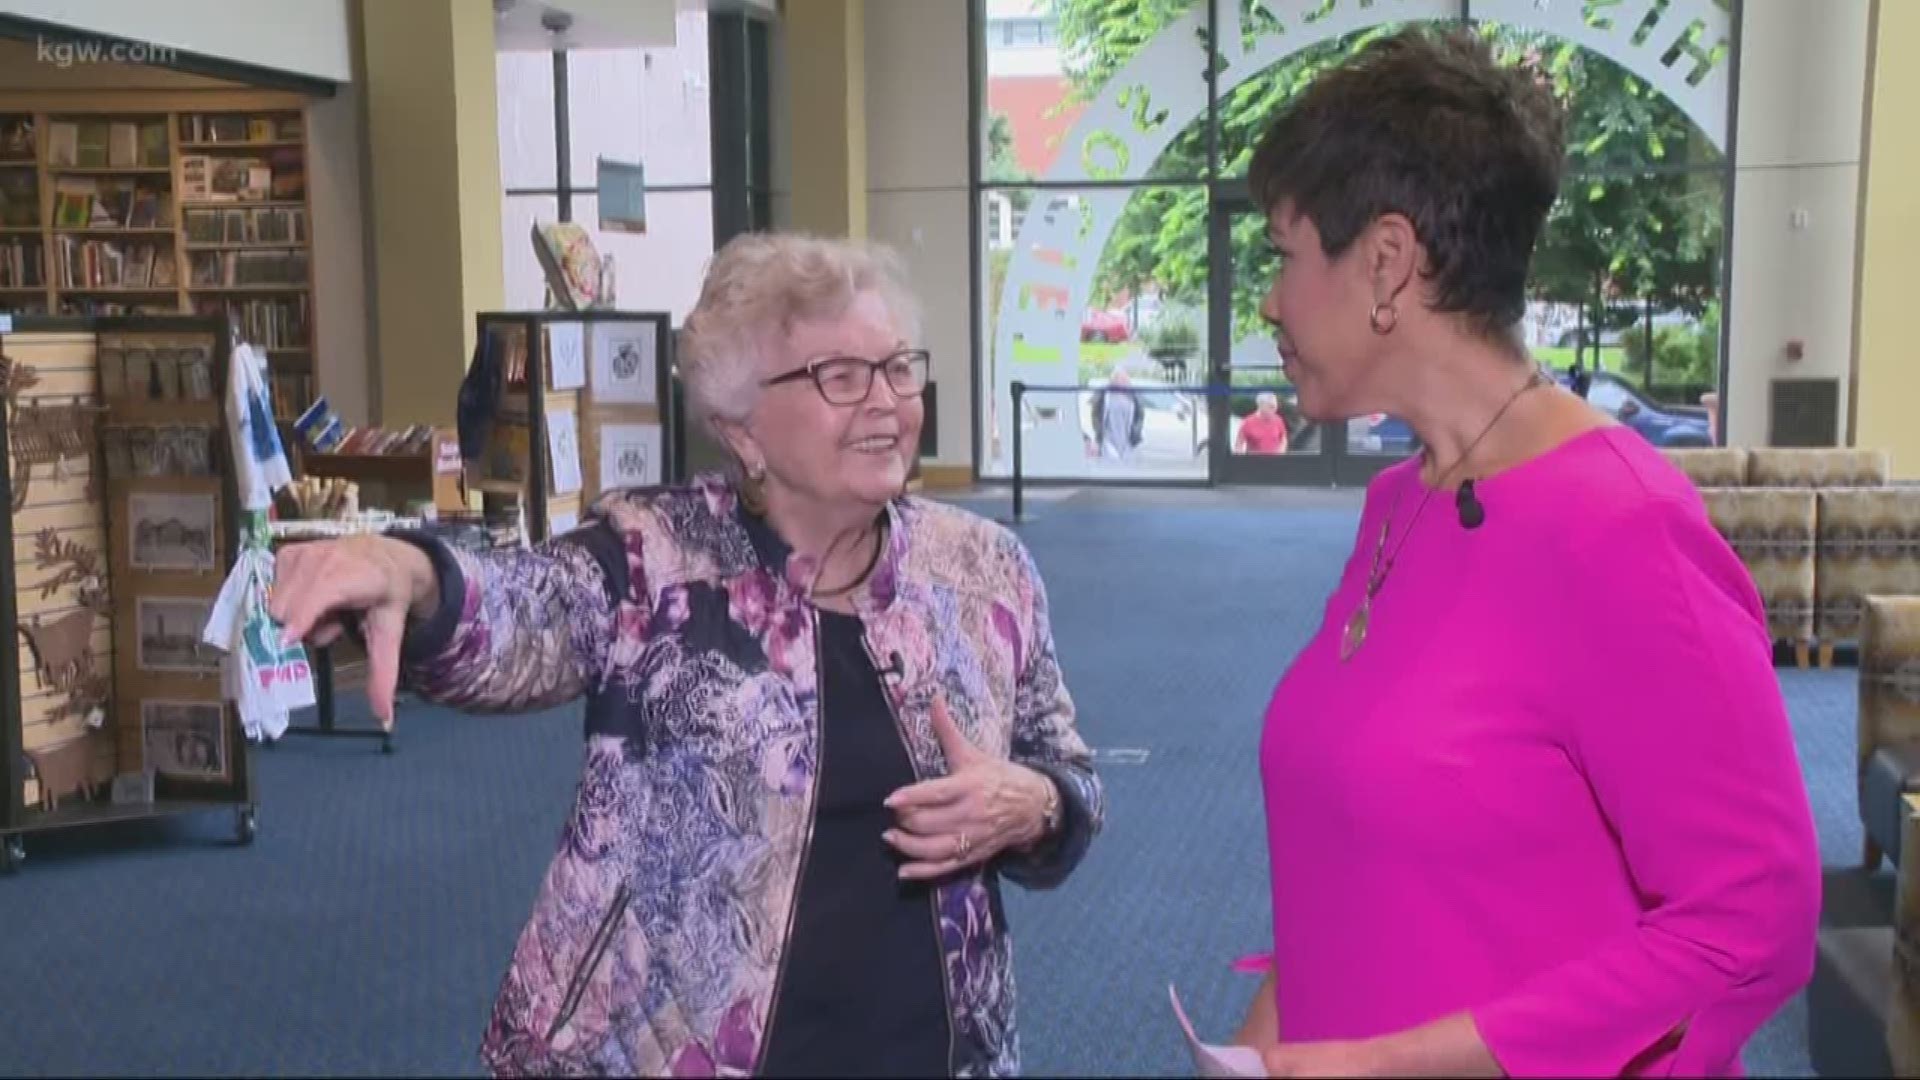 KGW Sunrise anchor interviews former Oregon Governor Barbara Roberts, now 82, who opens up about her personal life.